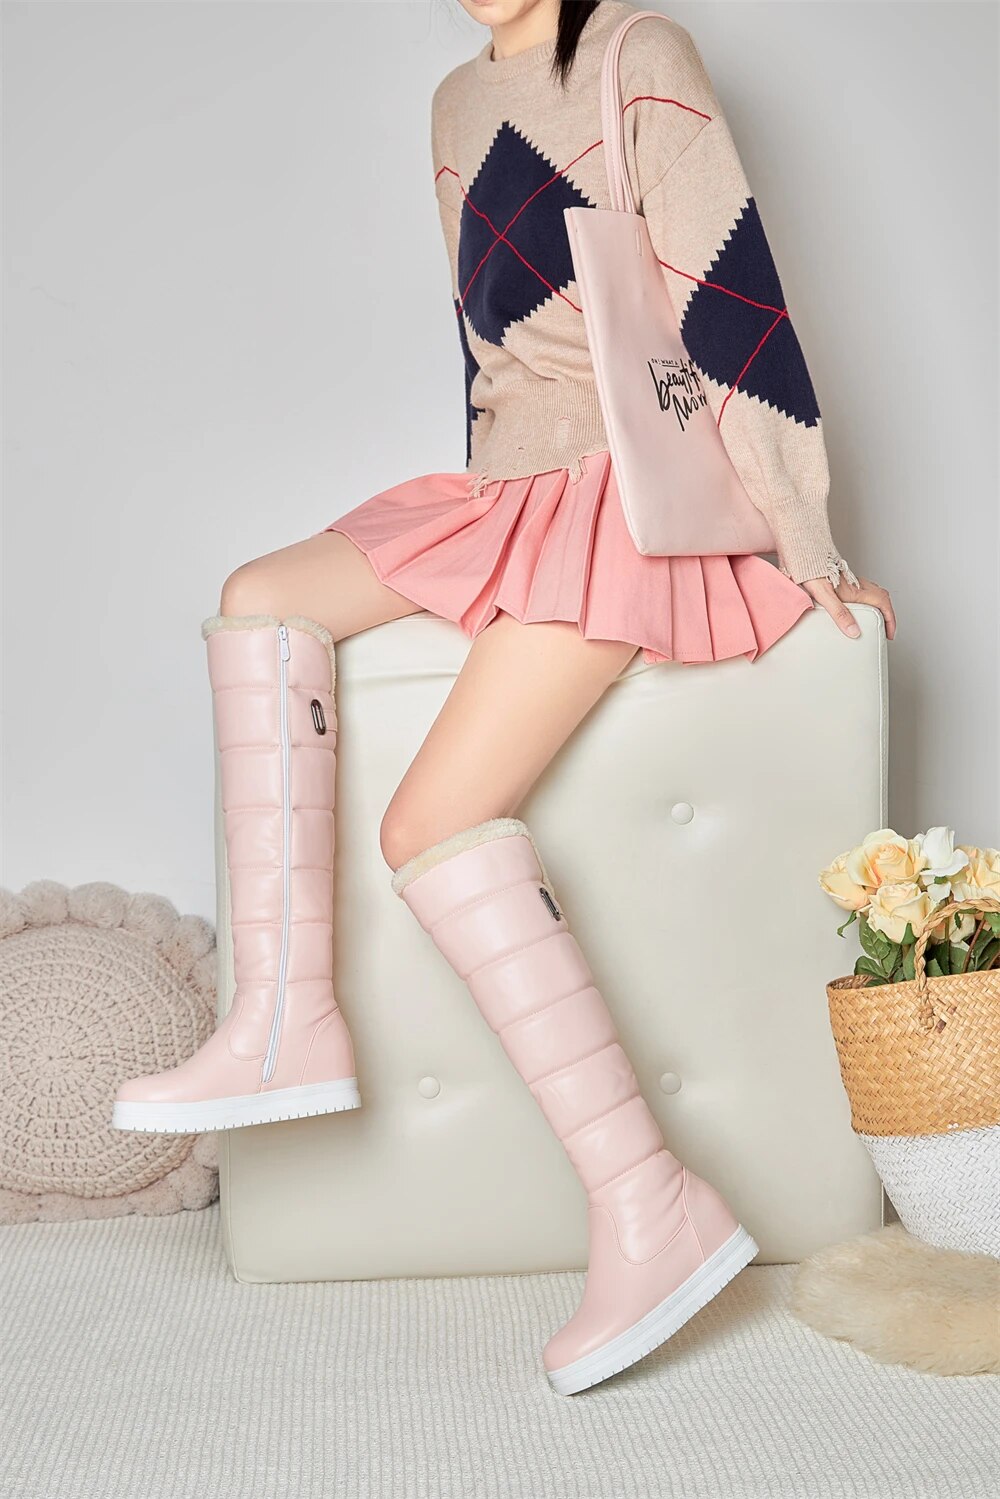 come4buy.com-Winter Warm Knee High Boots